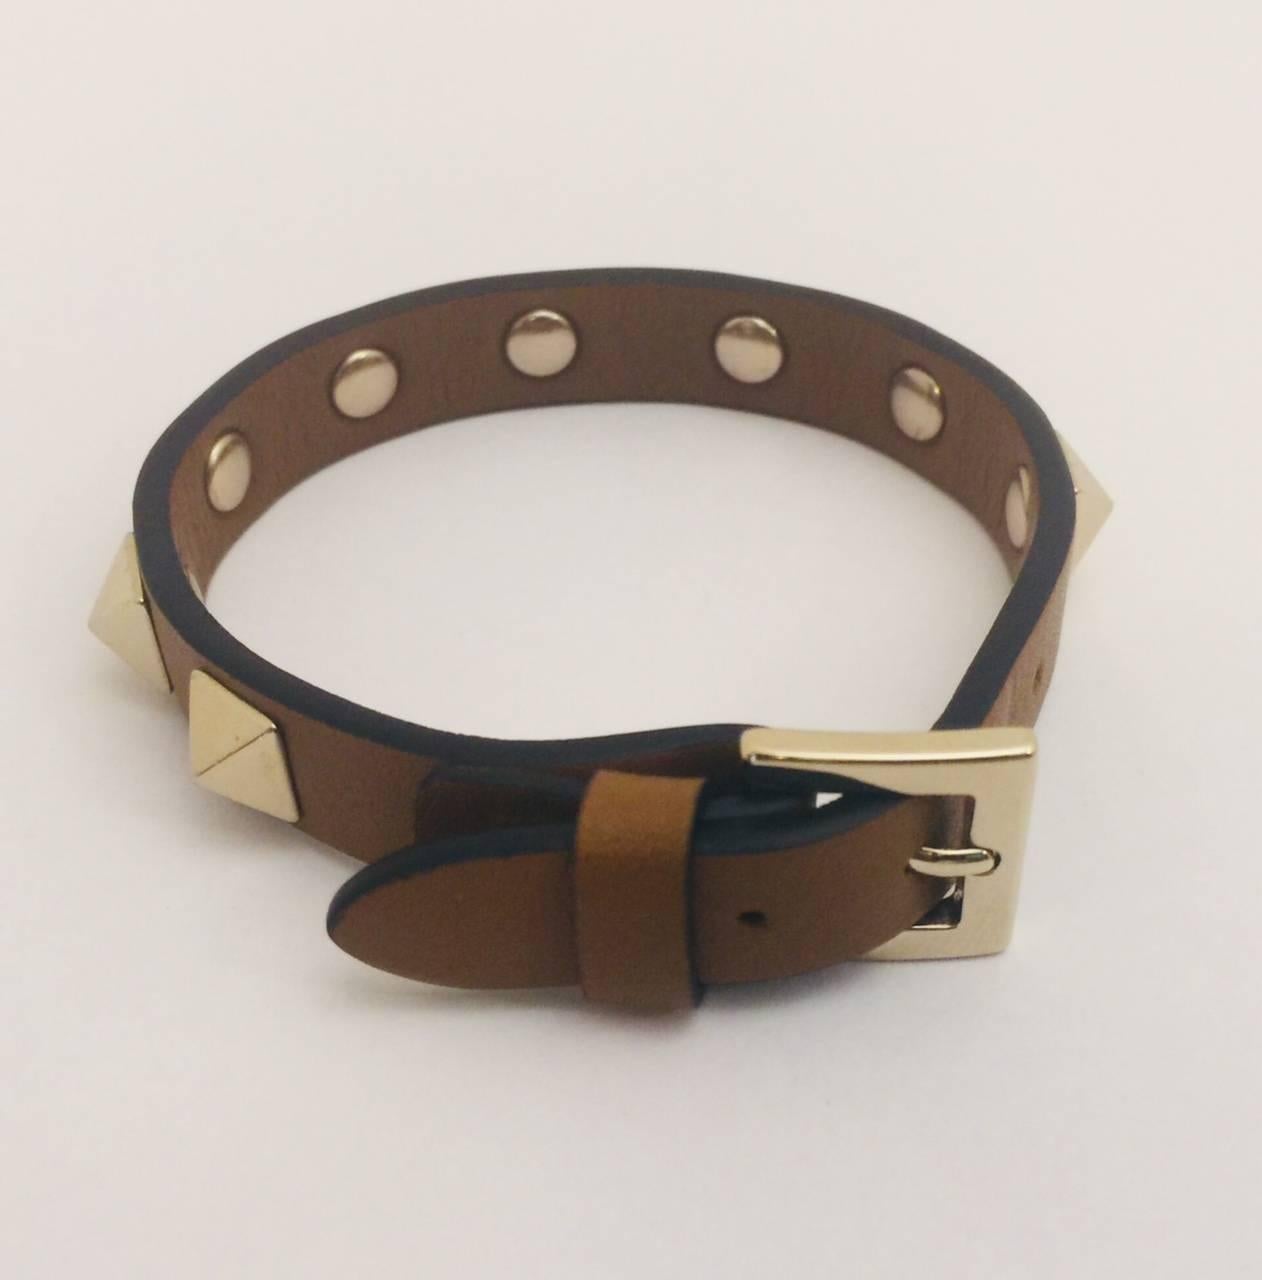 Instantly recognizable!  Narrow caramel color leather bracelet sports Valentino's iconic rock studs.  Adjustable belt buckle closure adjustable from 6.50-7.5